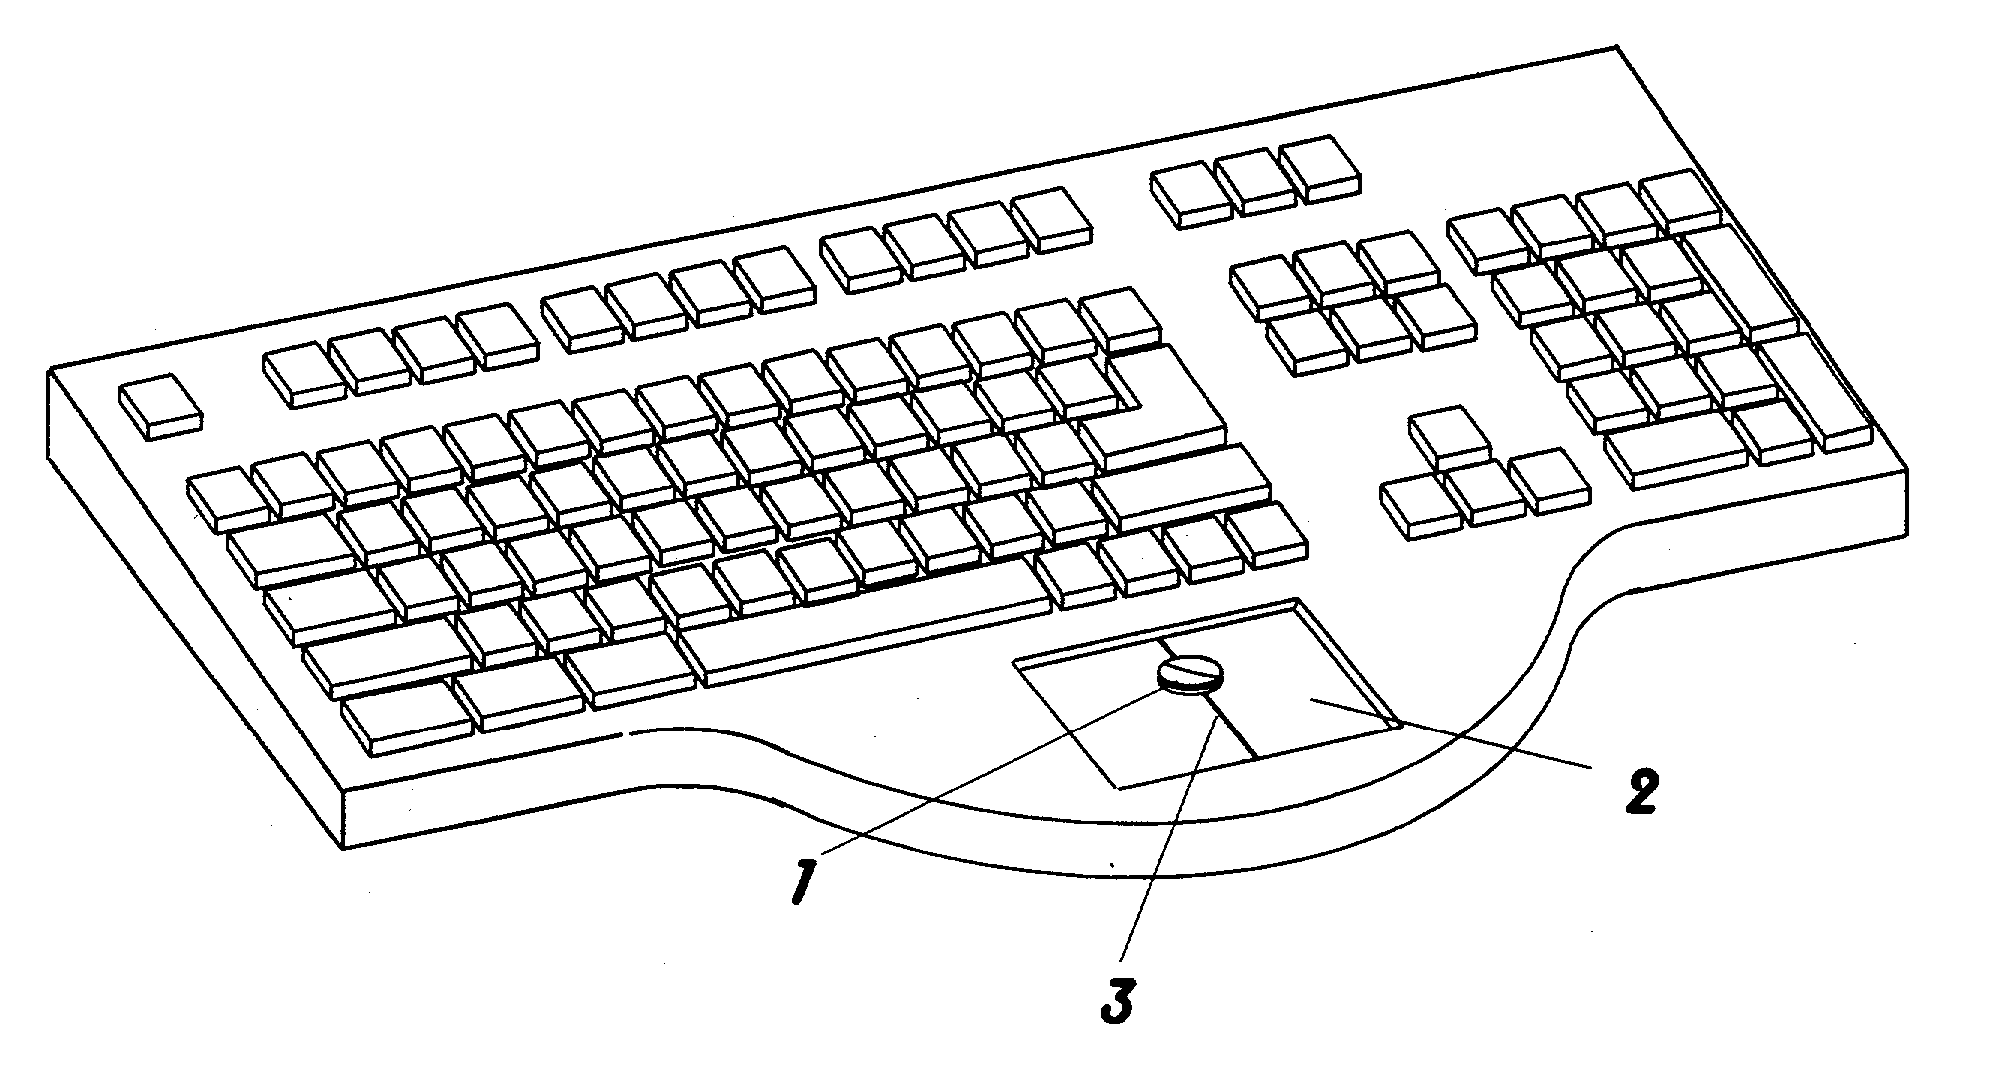 Integrated computer mouse and pad pointing device